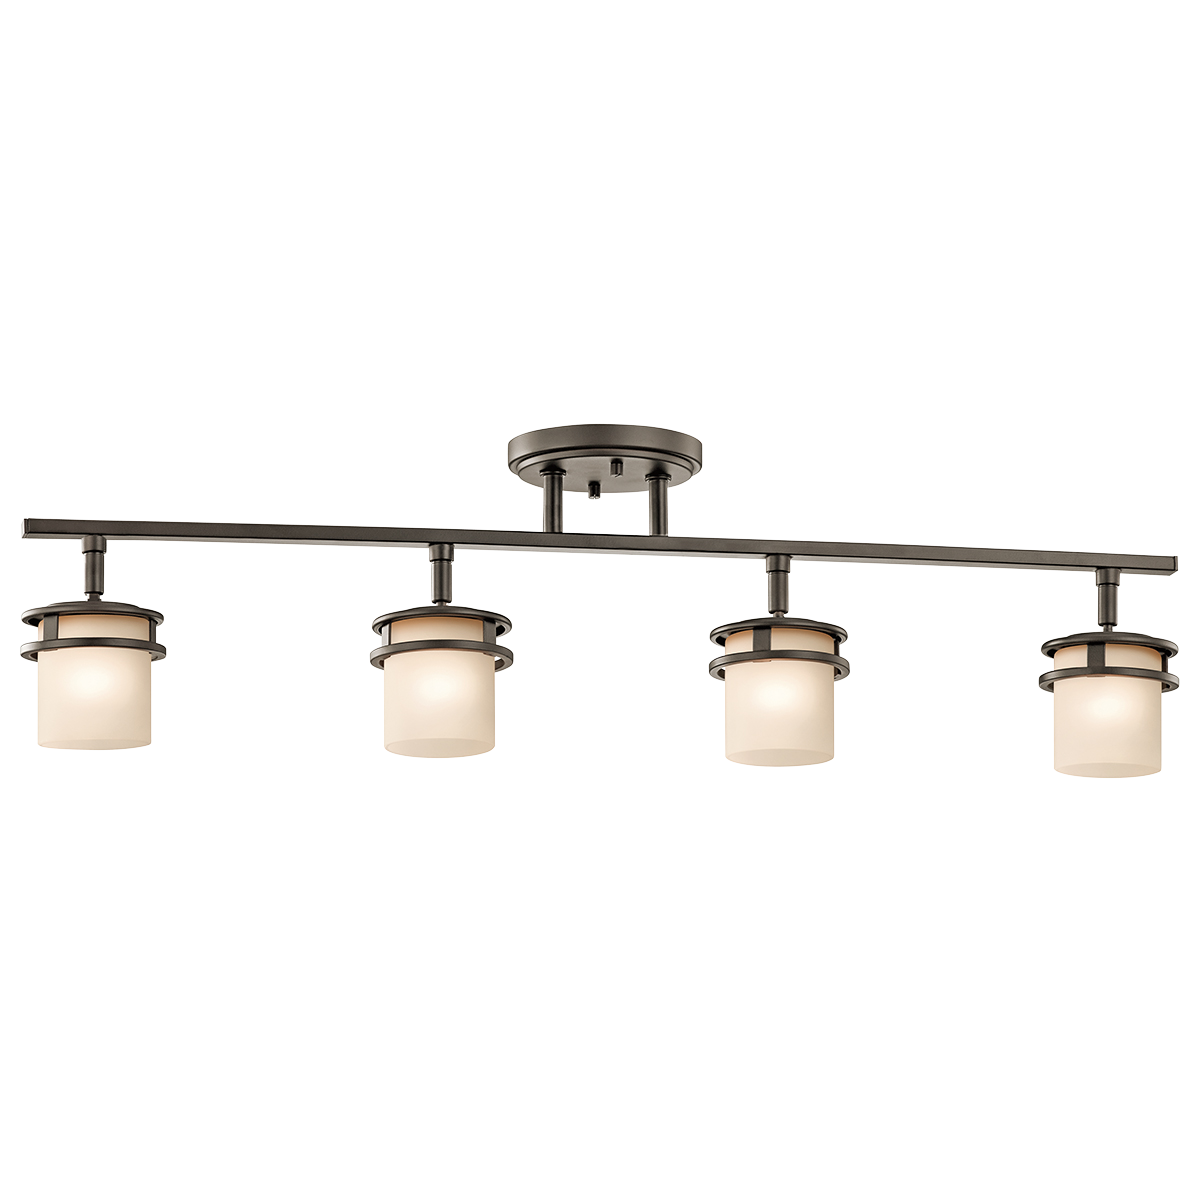 The Hendrik(TM) 30in. 4 light rail light features a classic look with its Olde Bronze(R) finish and light umber etched glass. Inspired by Hendrik Berlage, the Hendrik rail light works perfect in a bathroom or powder room that has a traditional and modern look.